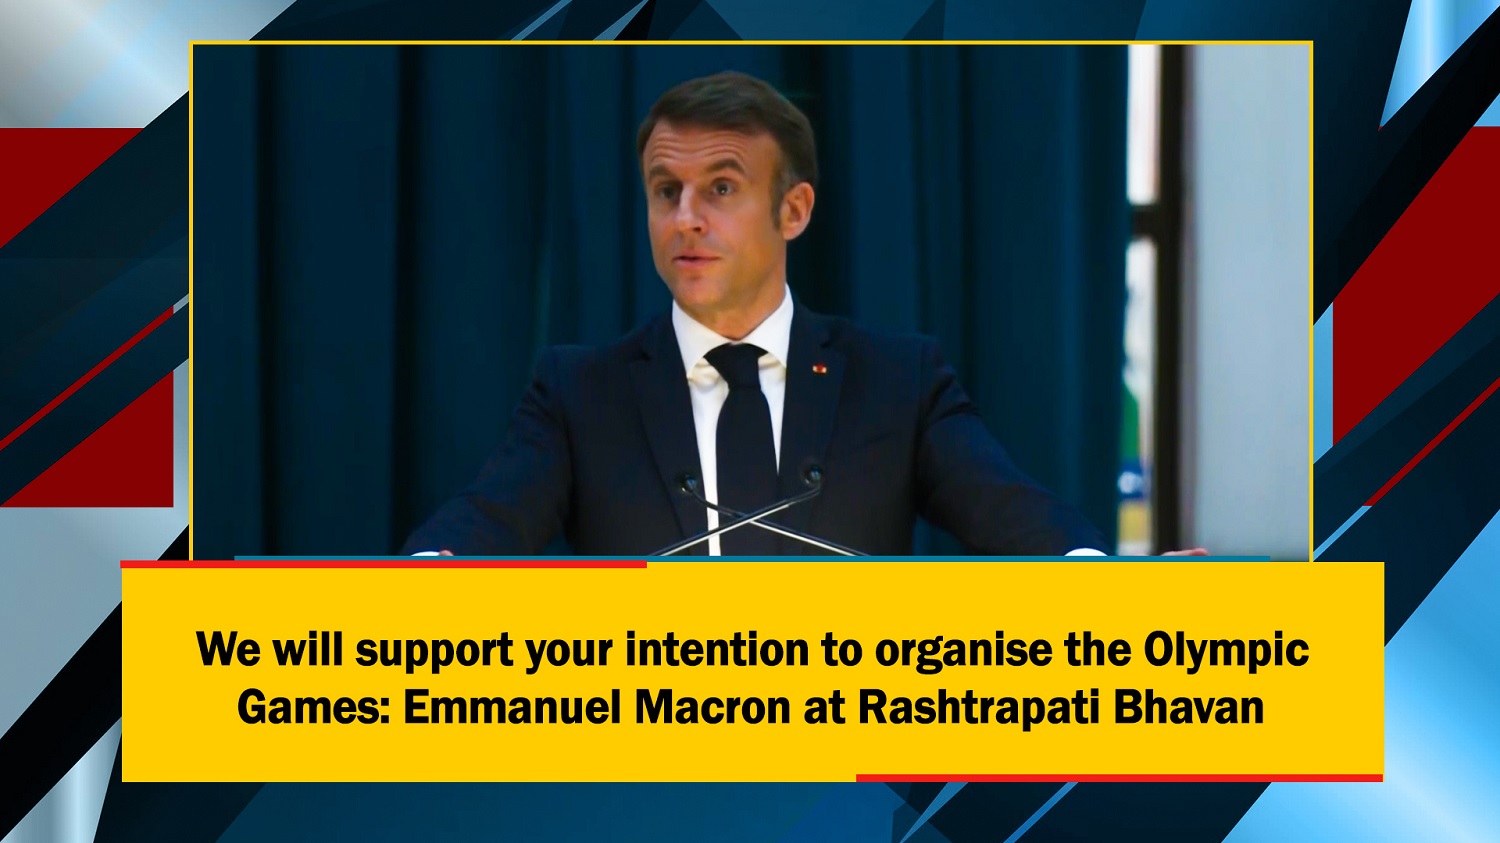 We will support your intentions to organise the Olympic Games: Emmanuel Macron at Rashtrapati Bhavan